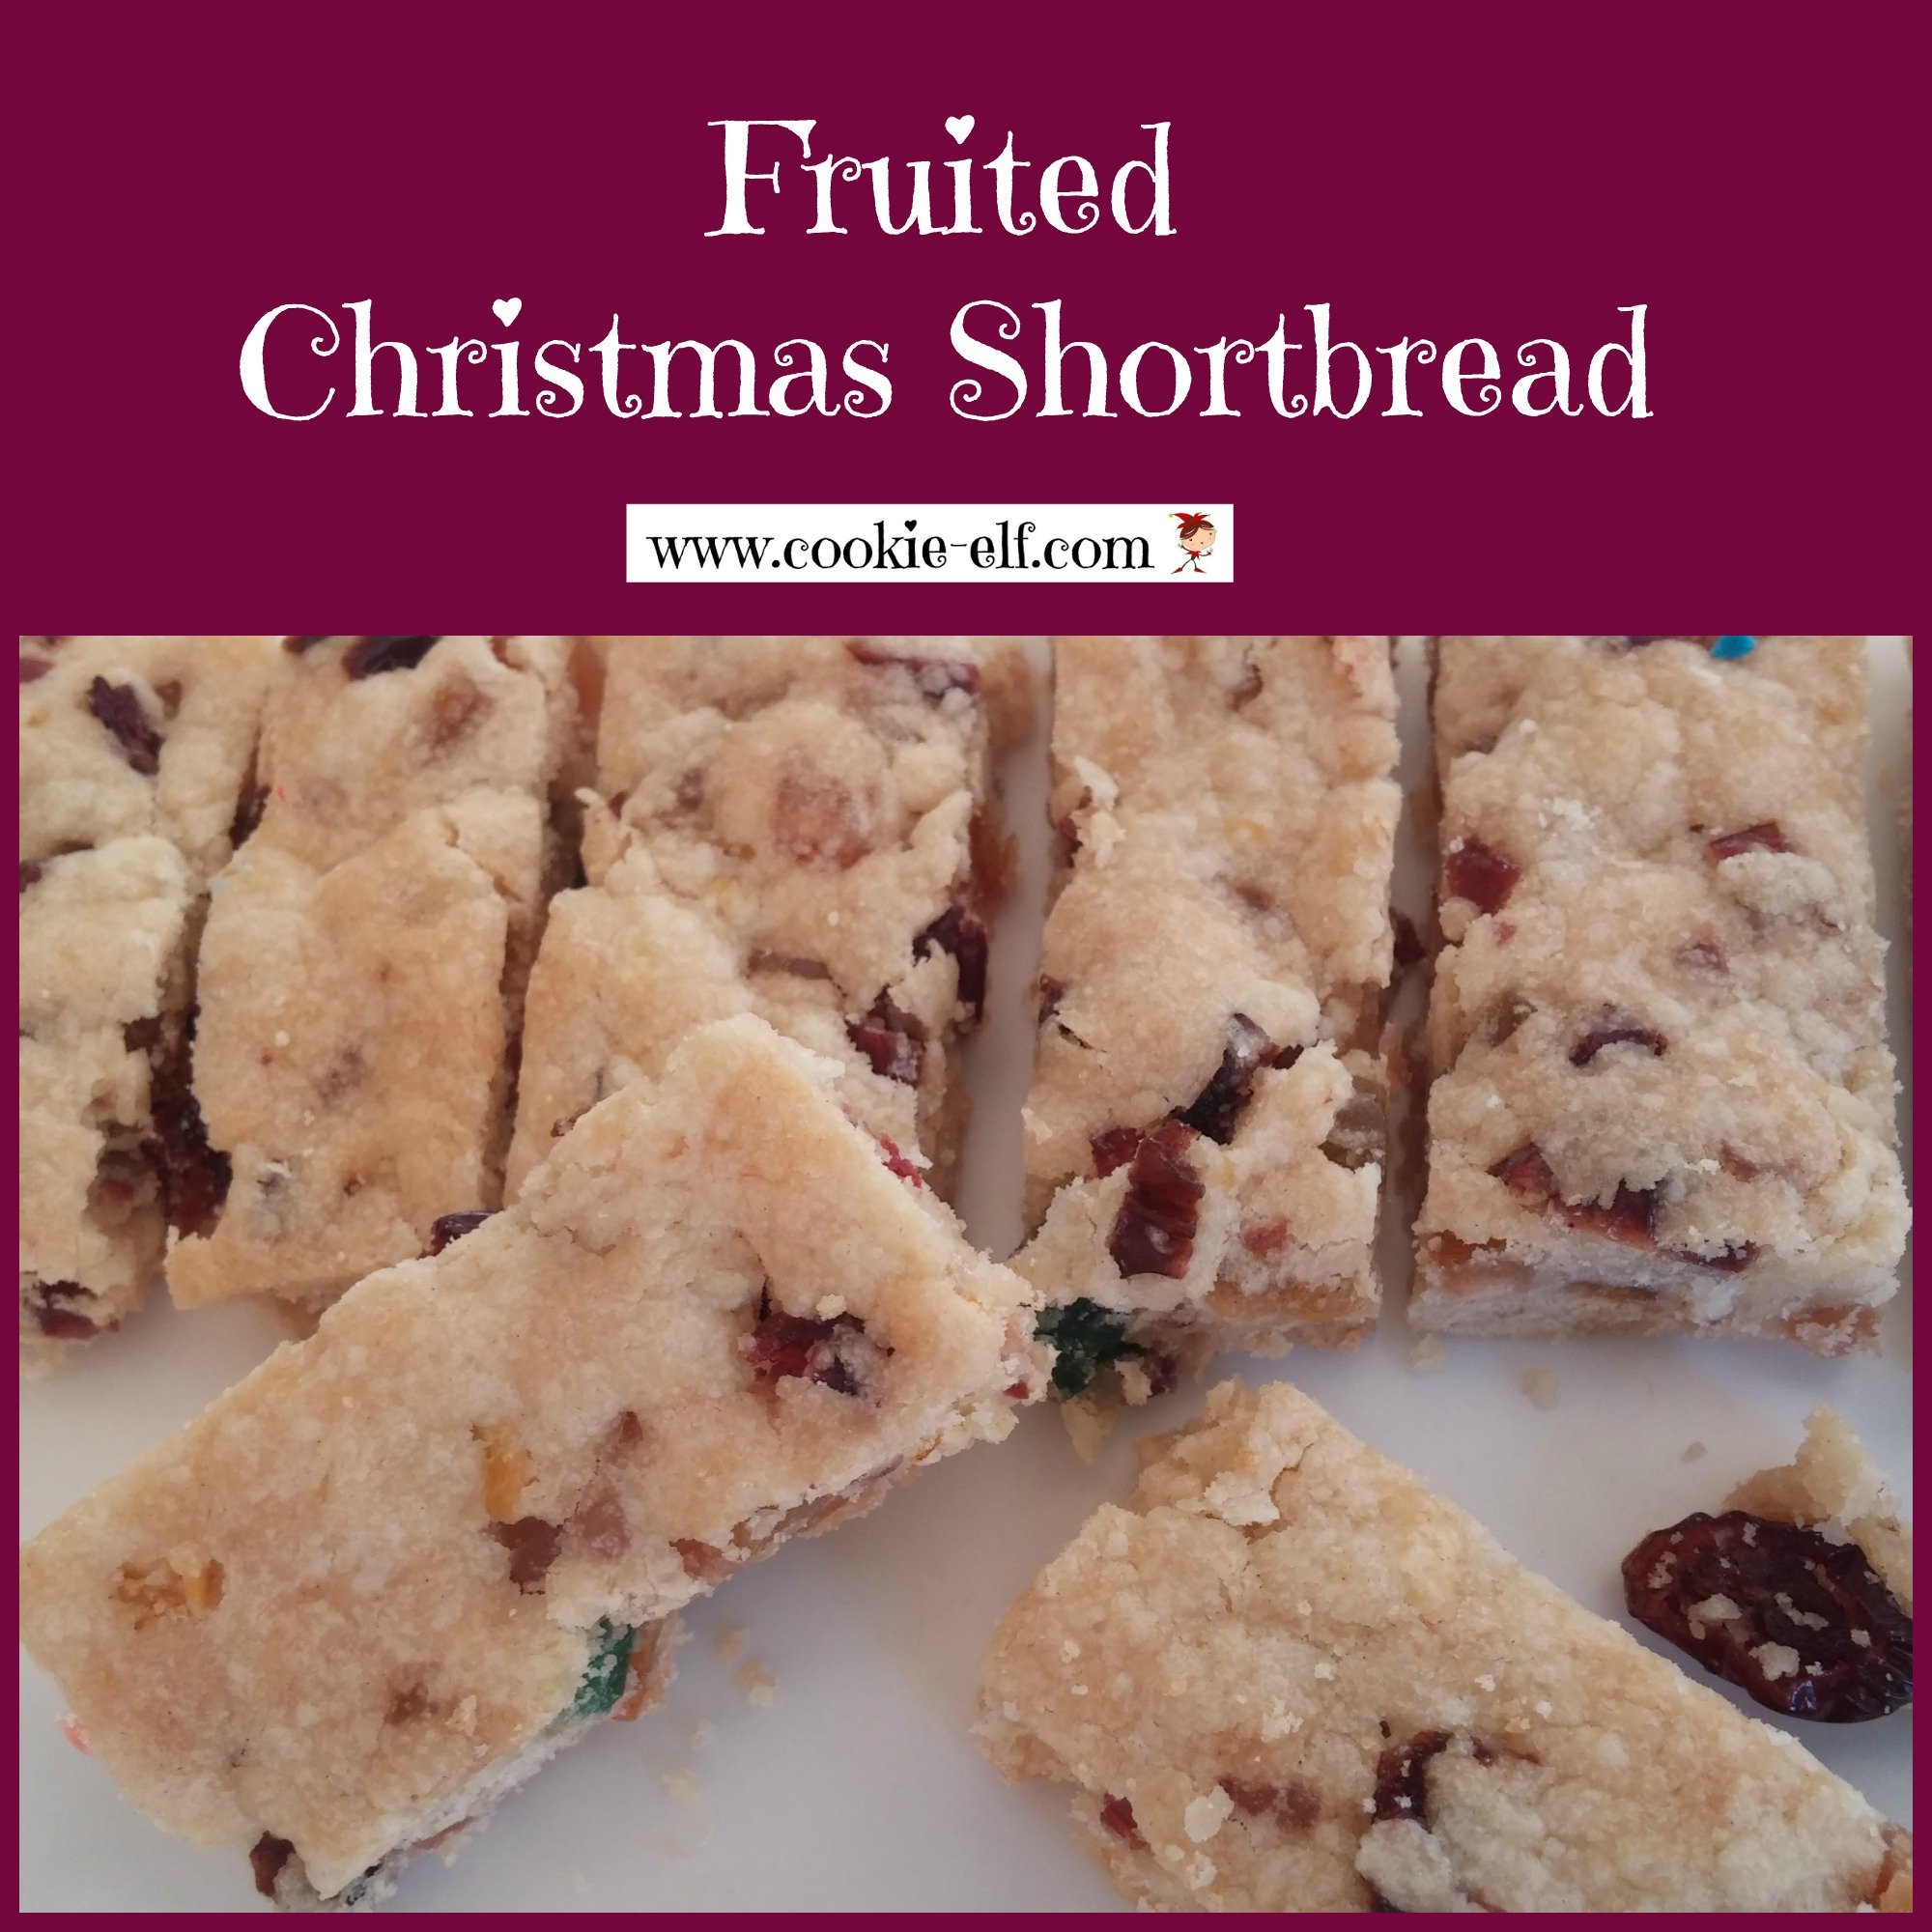 Fruited Christmas Shortbread from The Cookie Elf